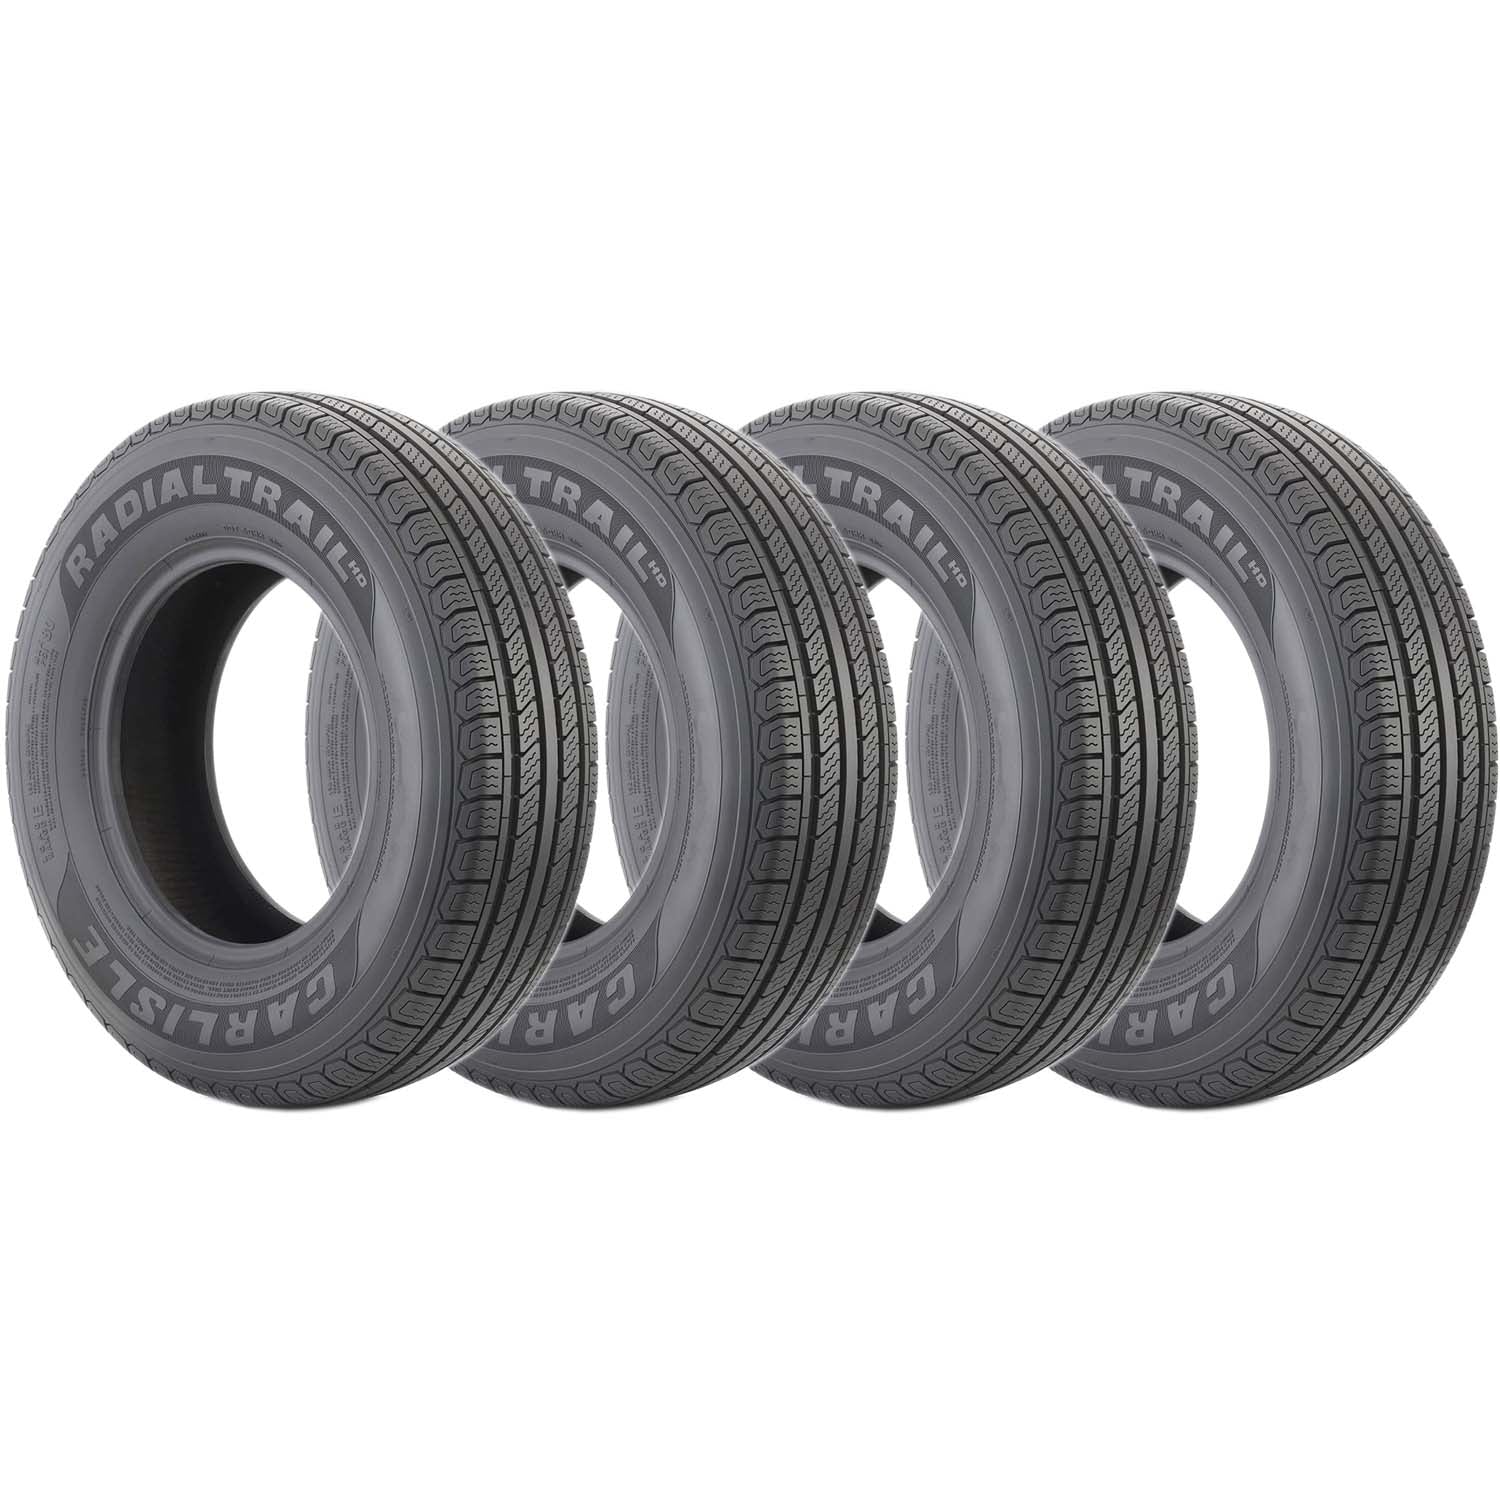 Carlisle Radial Trail HD Trailer Tire LRE 10ply ST235/85R16 Pack of 4